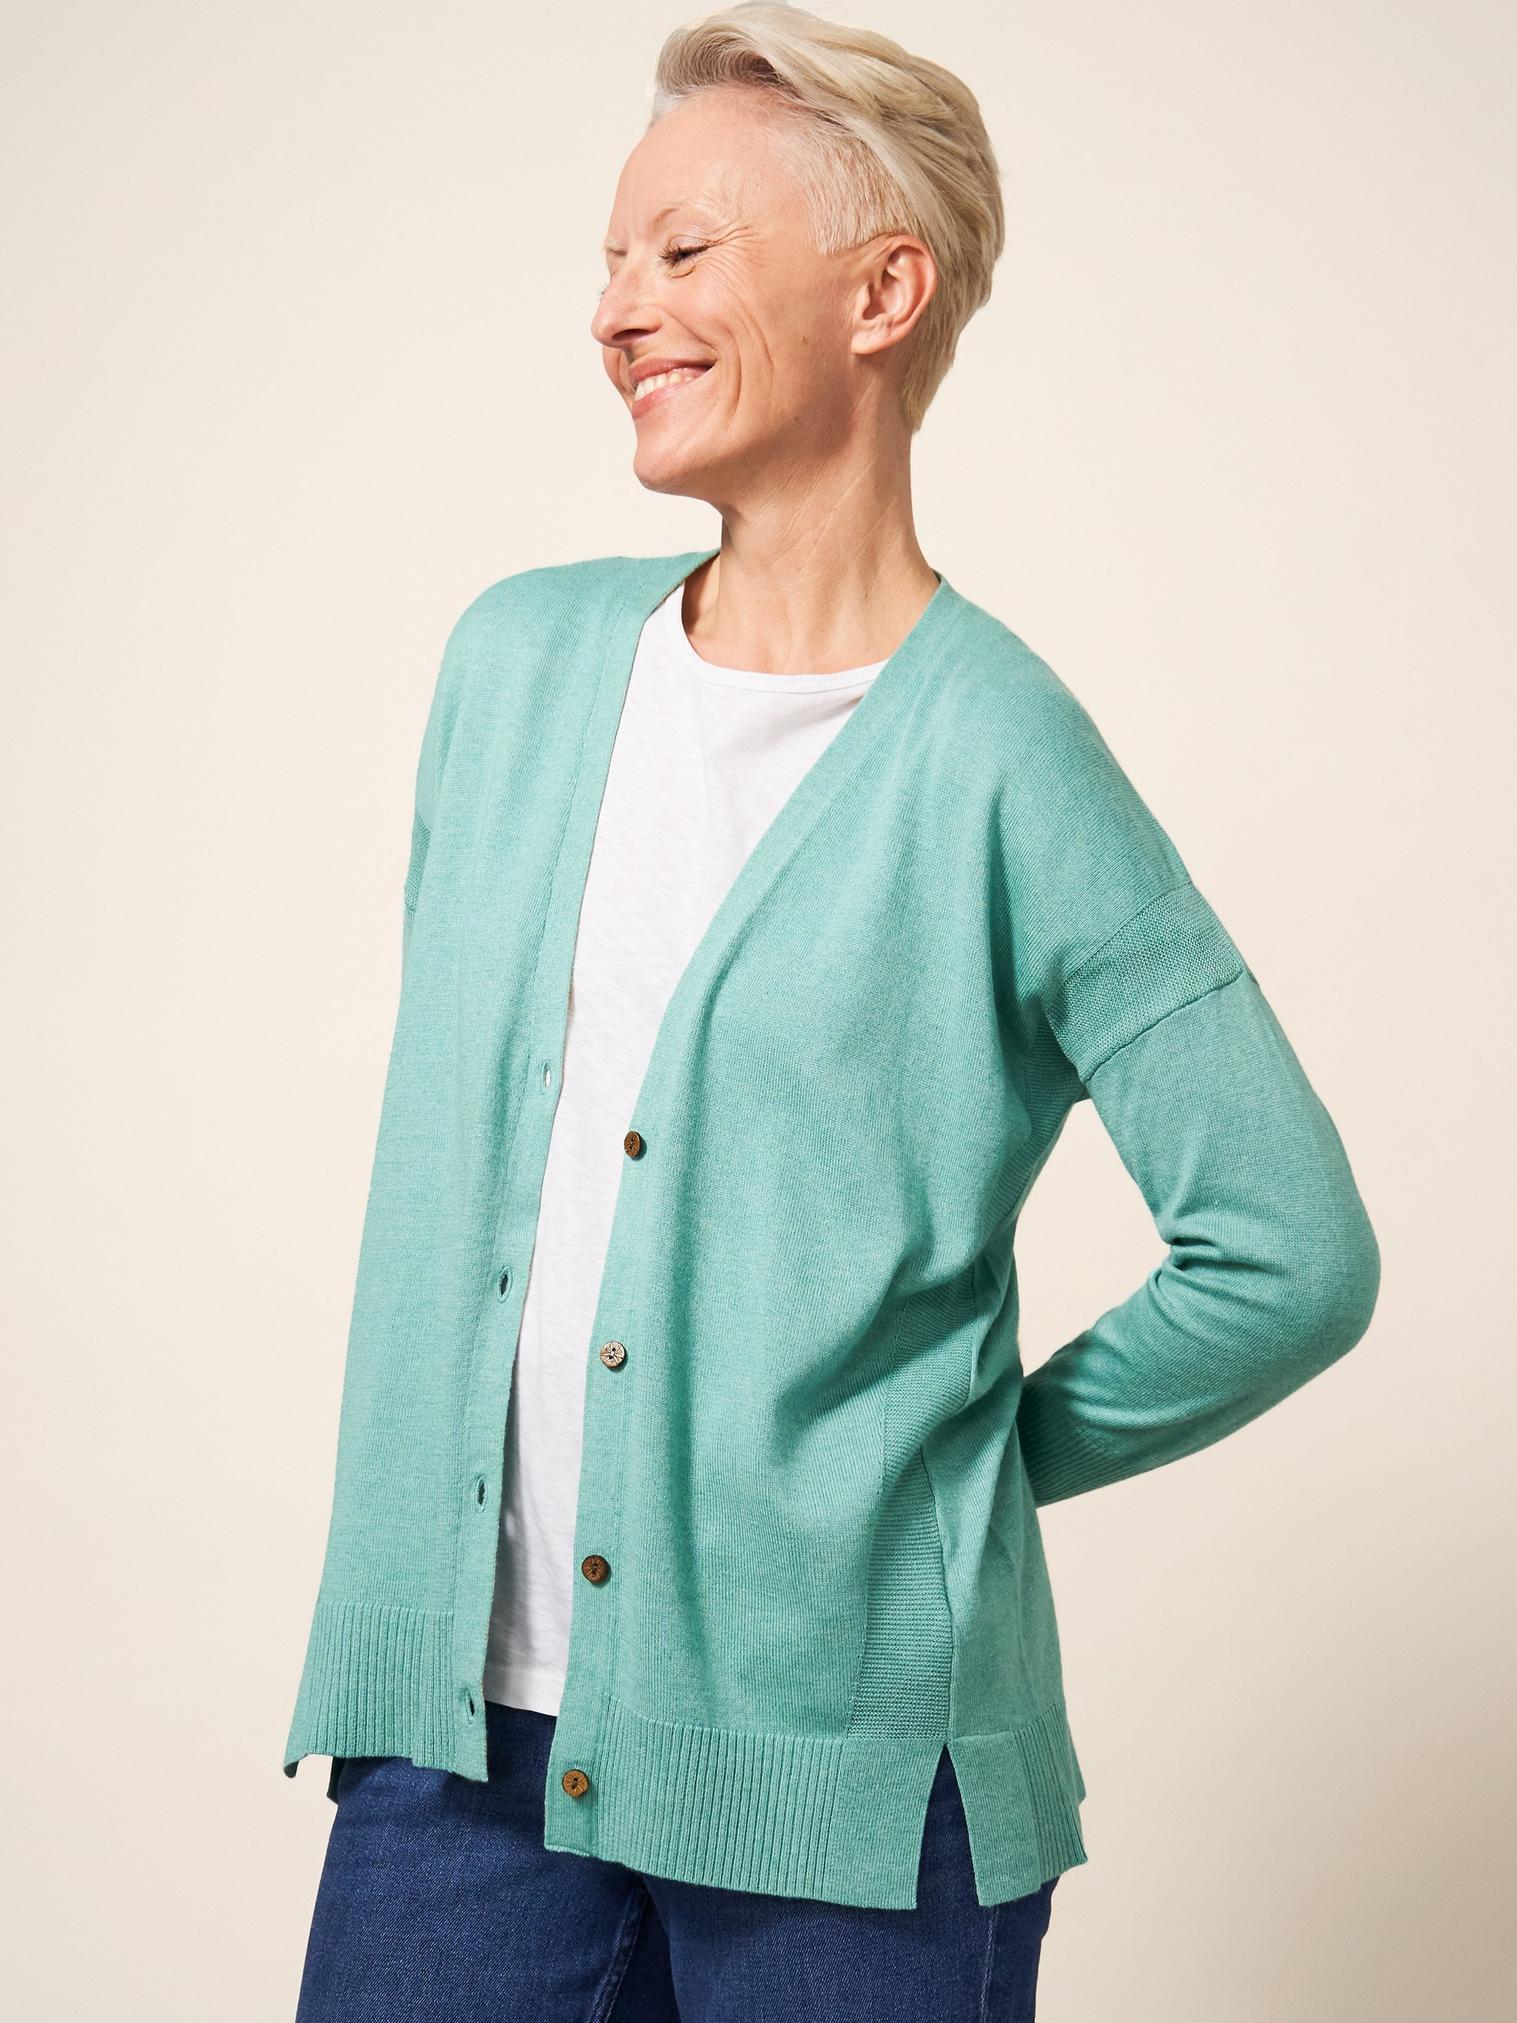 OLIVE CARDI in MID TEAL - LIFESTYLE